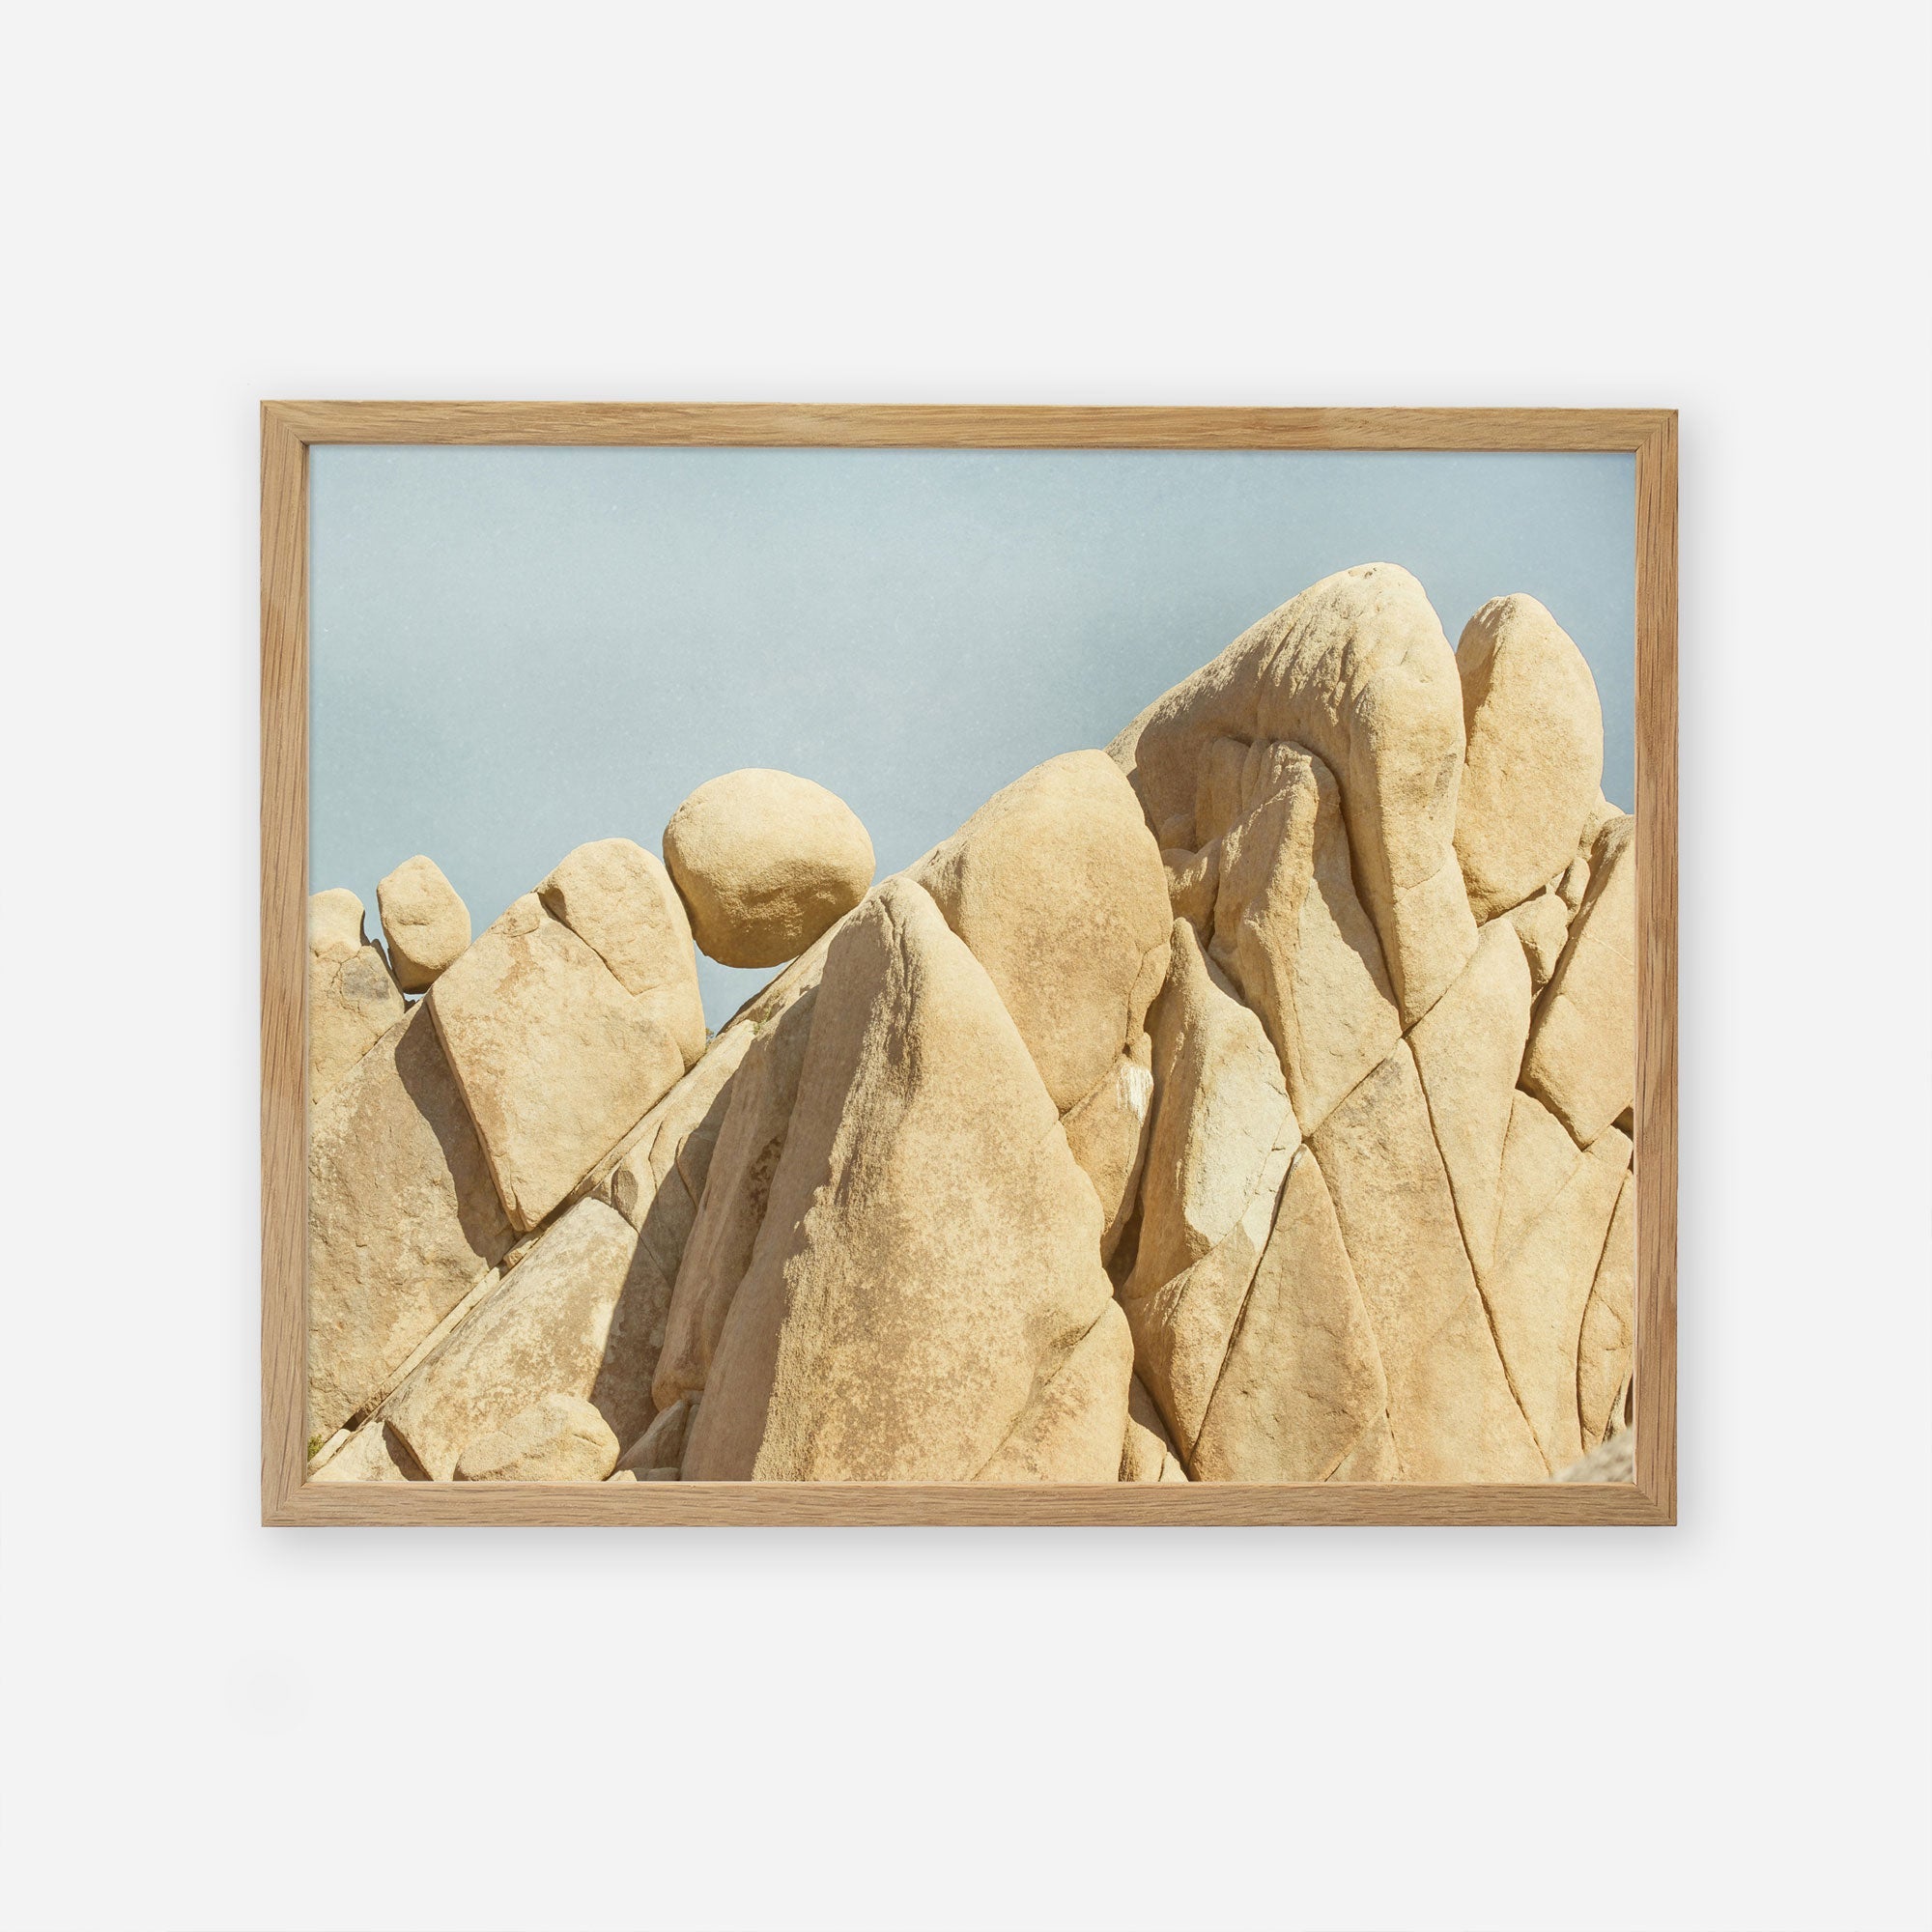 A framed photograph of a natural beige rock formation in Joshua Tree National Park, with jagged, smooth surfaces under a clear blue sky. The formation consists of clustered, vertical rock peaks. Offley Green&#39;s Joshua Tree Print, &#39;Rock Formations&#39; showcases this stunning scene beautifully.